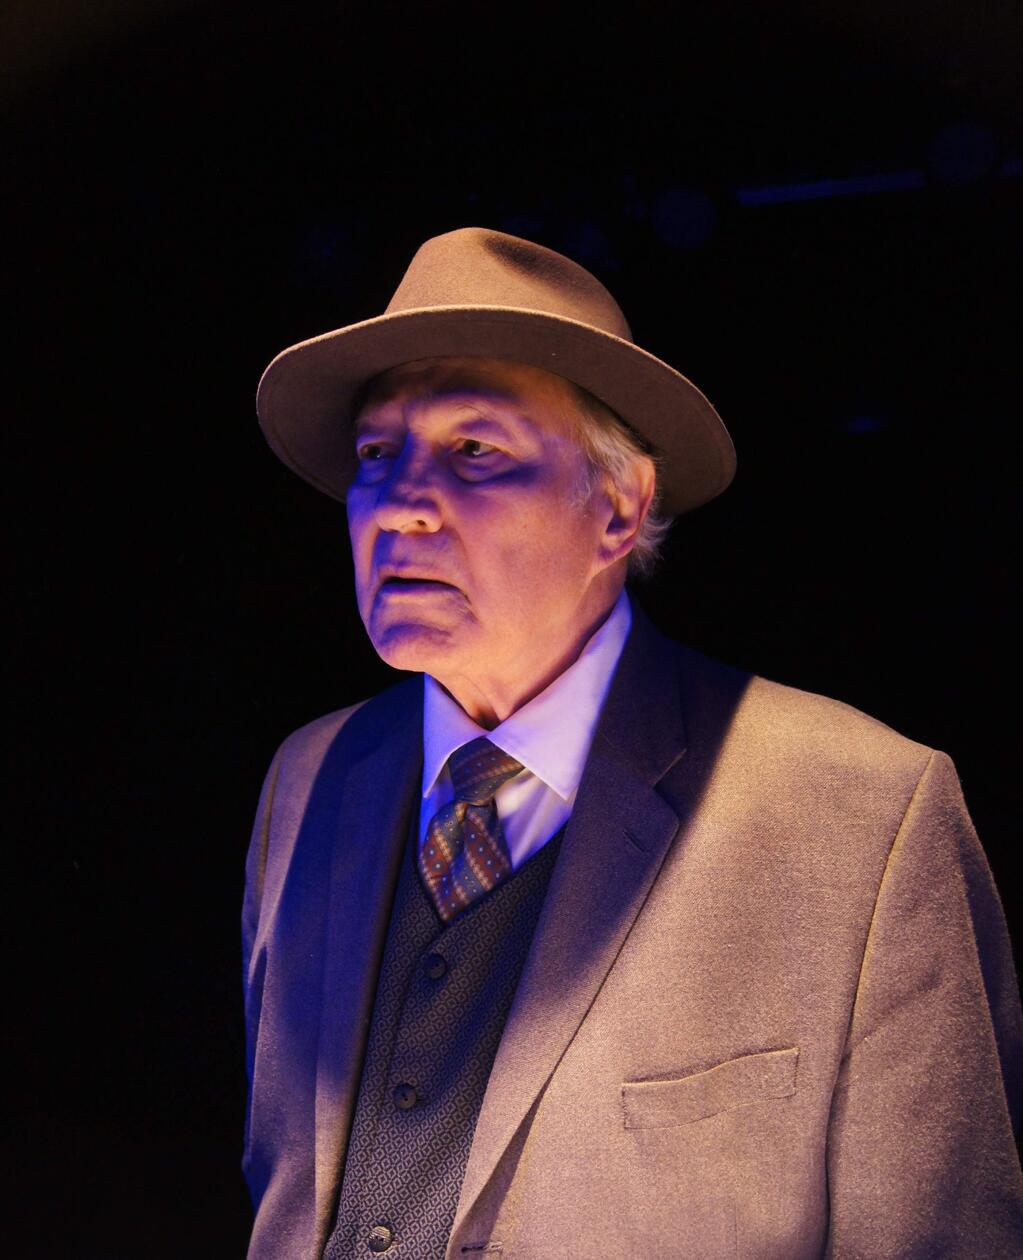 Veteran actor/director Charles Siebert as Willy Loman in the 6th Street Playhouse production of Arthur Miller's 'Death of a Salesman.' Sieberts probably best known for his role as Dr. Stanley Riverside on the television series Trapper John, M.D. which he portrayed from 1979 to 1986. (6th Street Playhouse)